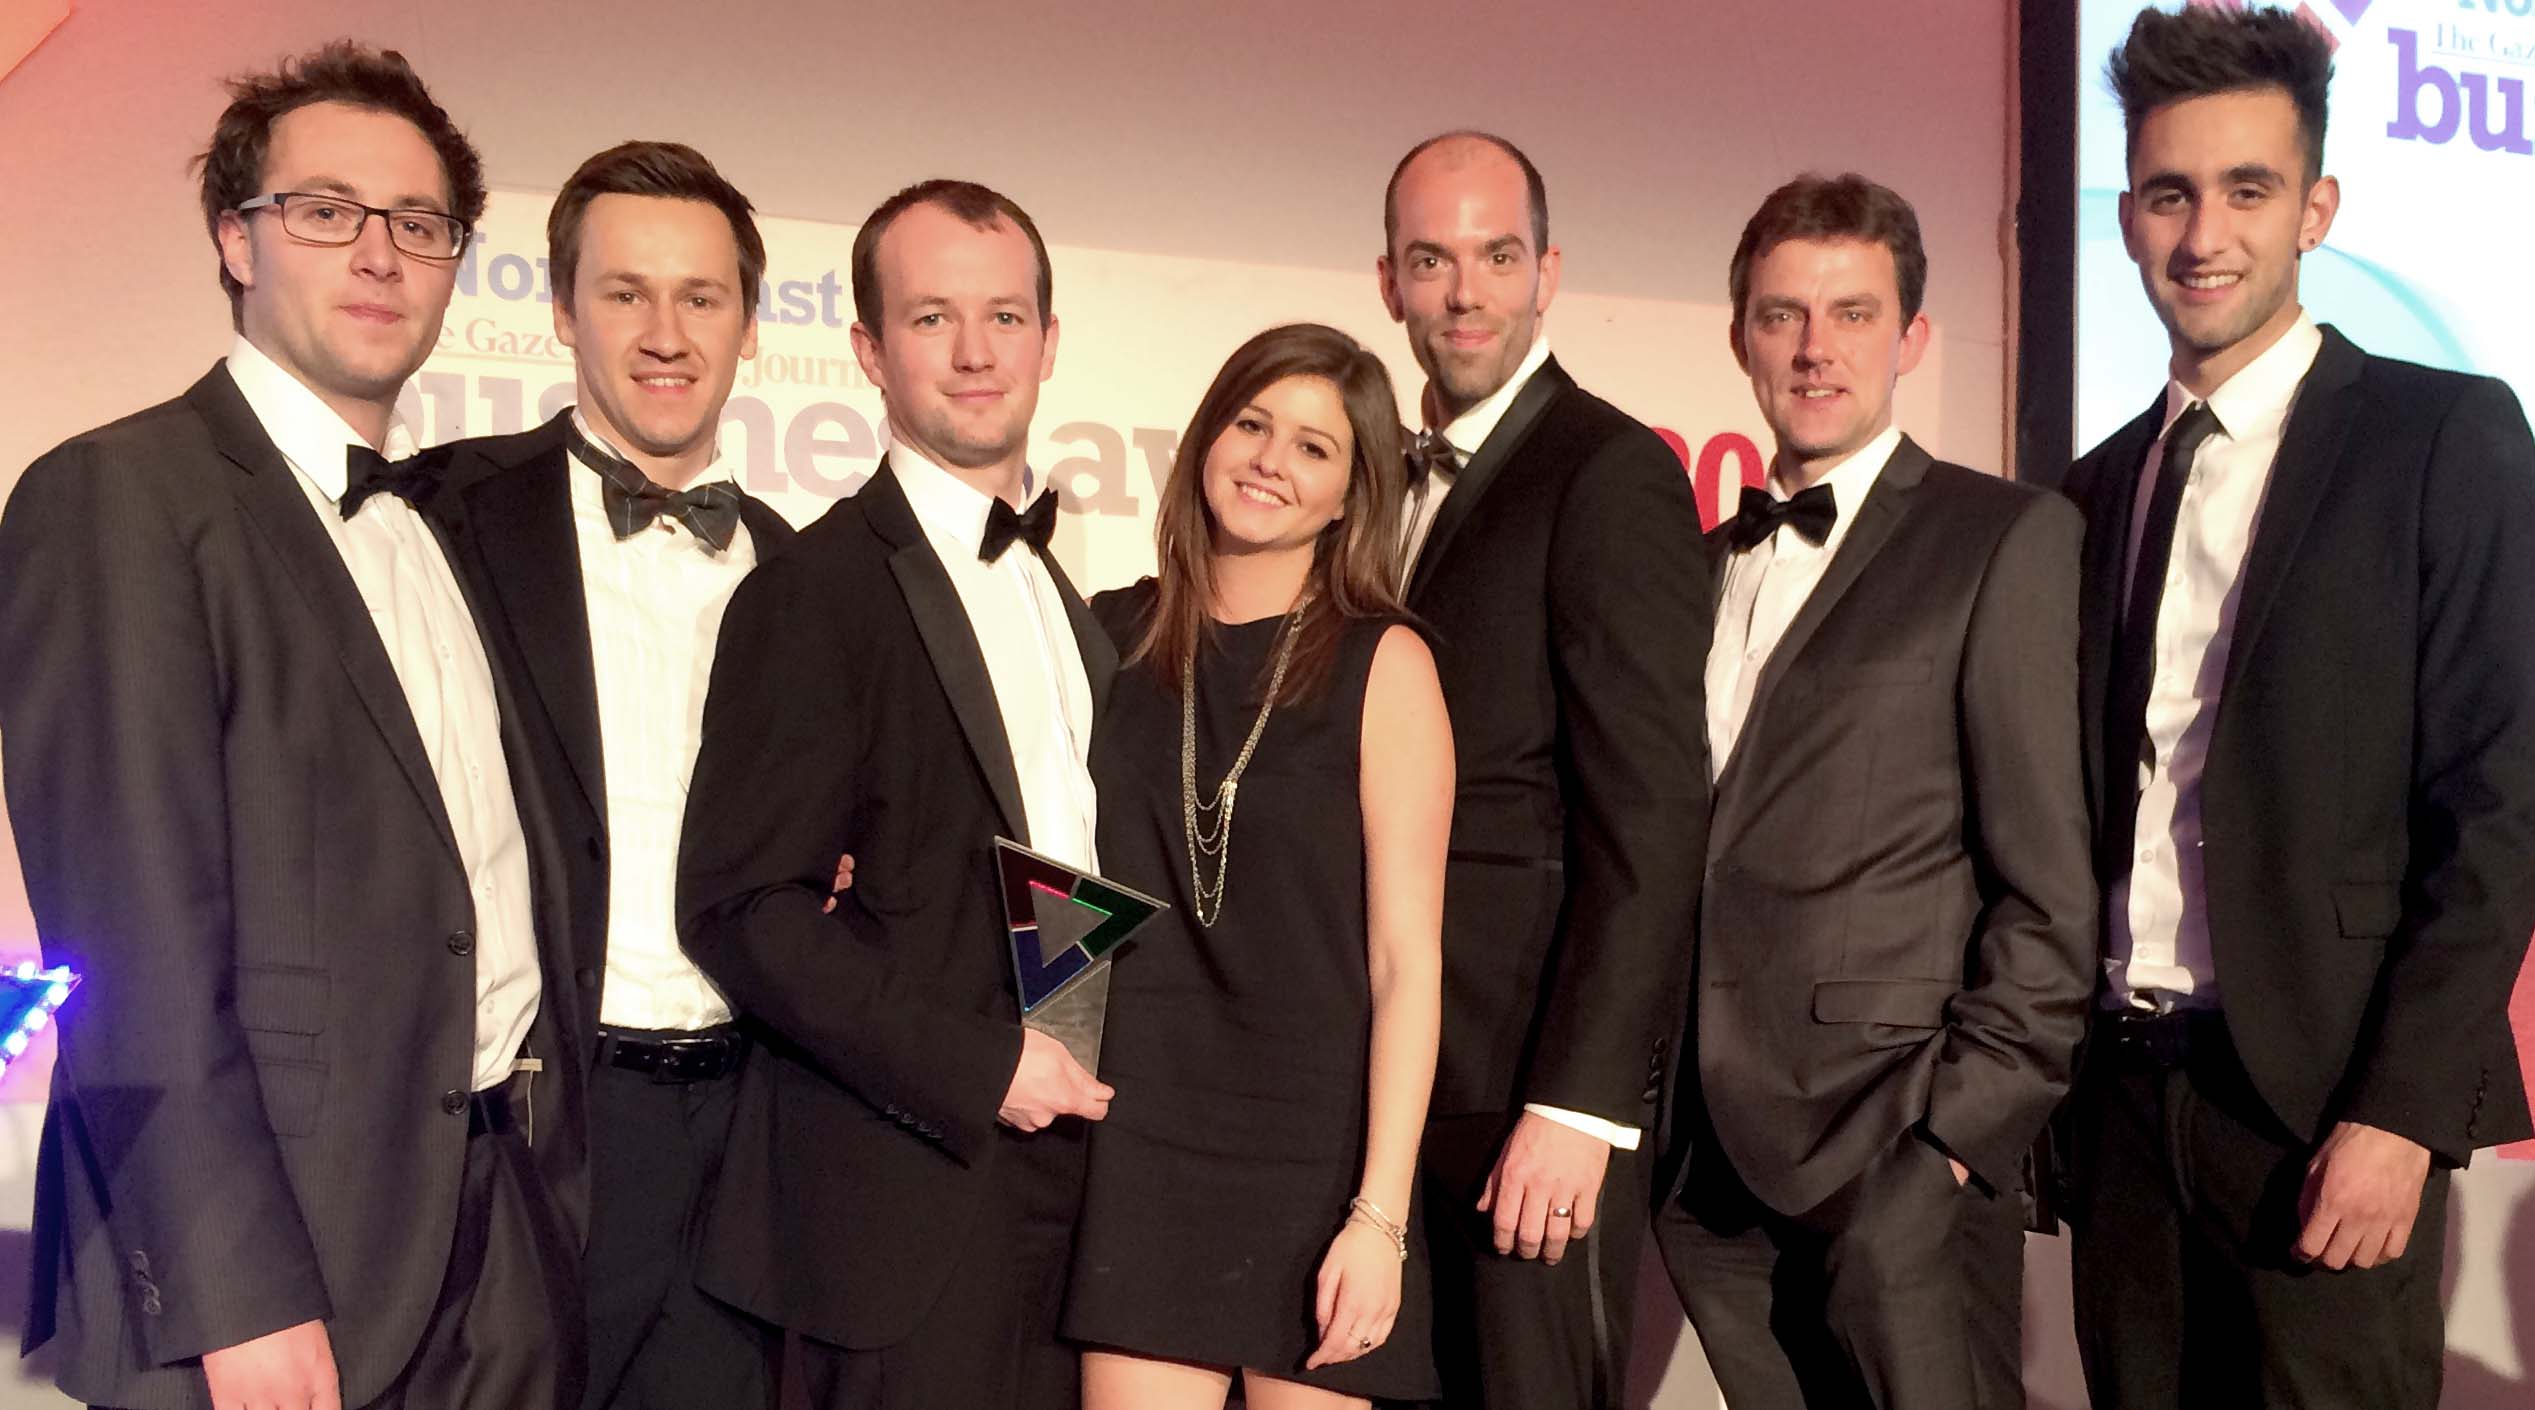 Aycliffe Company Scoops Award for Export Success